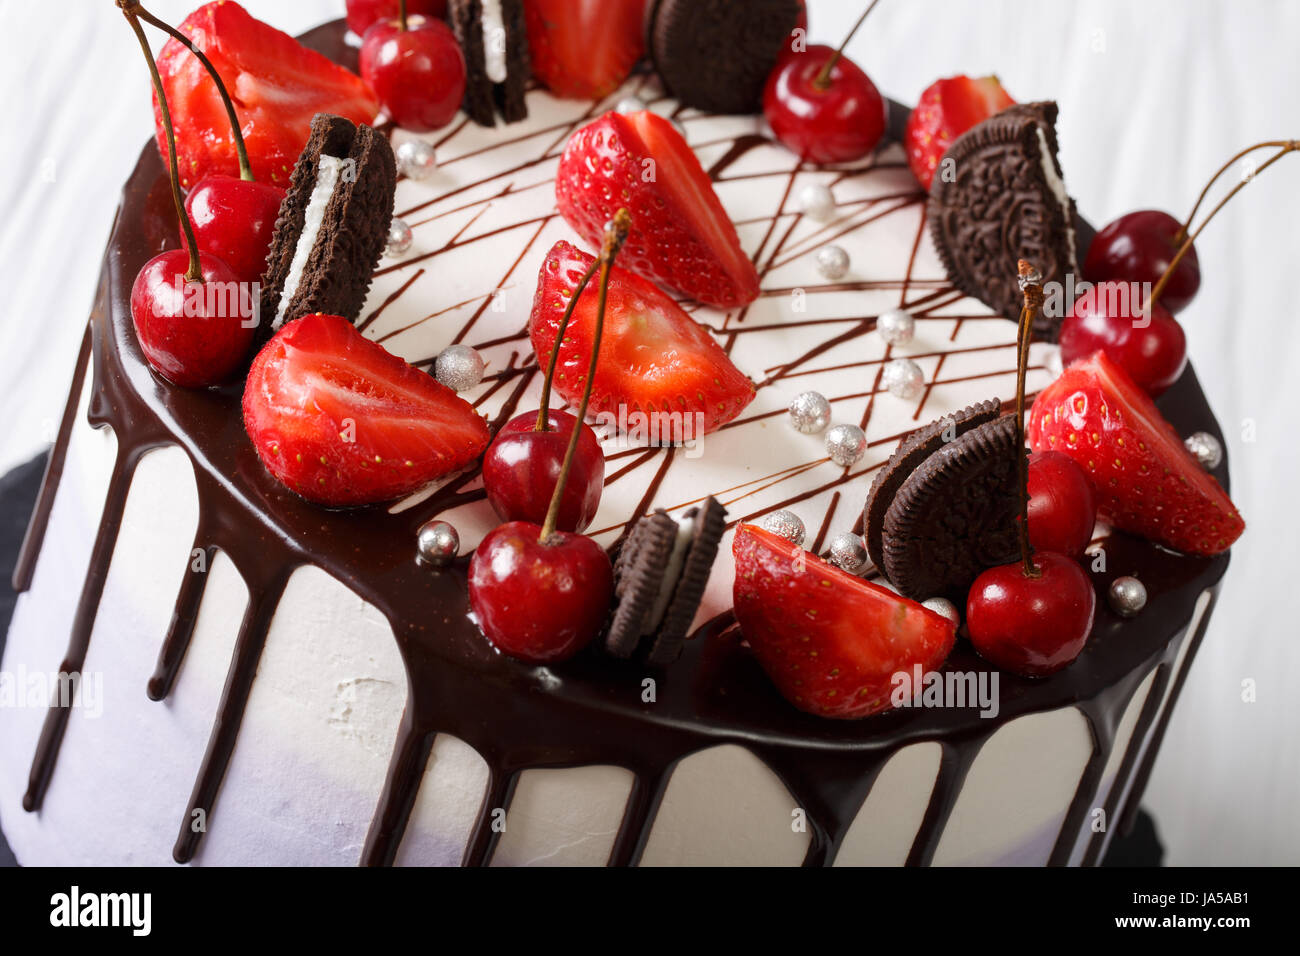 Mousse cake with fresh strawberries and cherries, decorated with biscuits and chocolate close-up. Horizontal Stock Photo